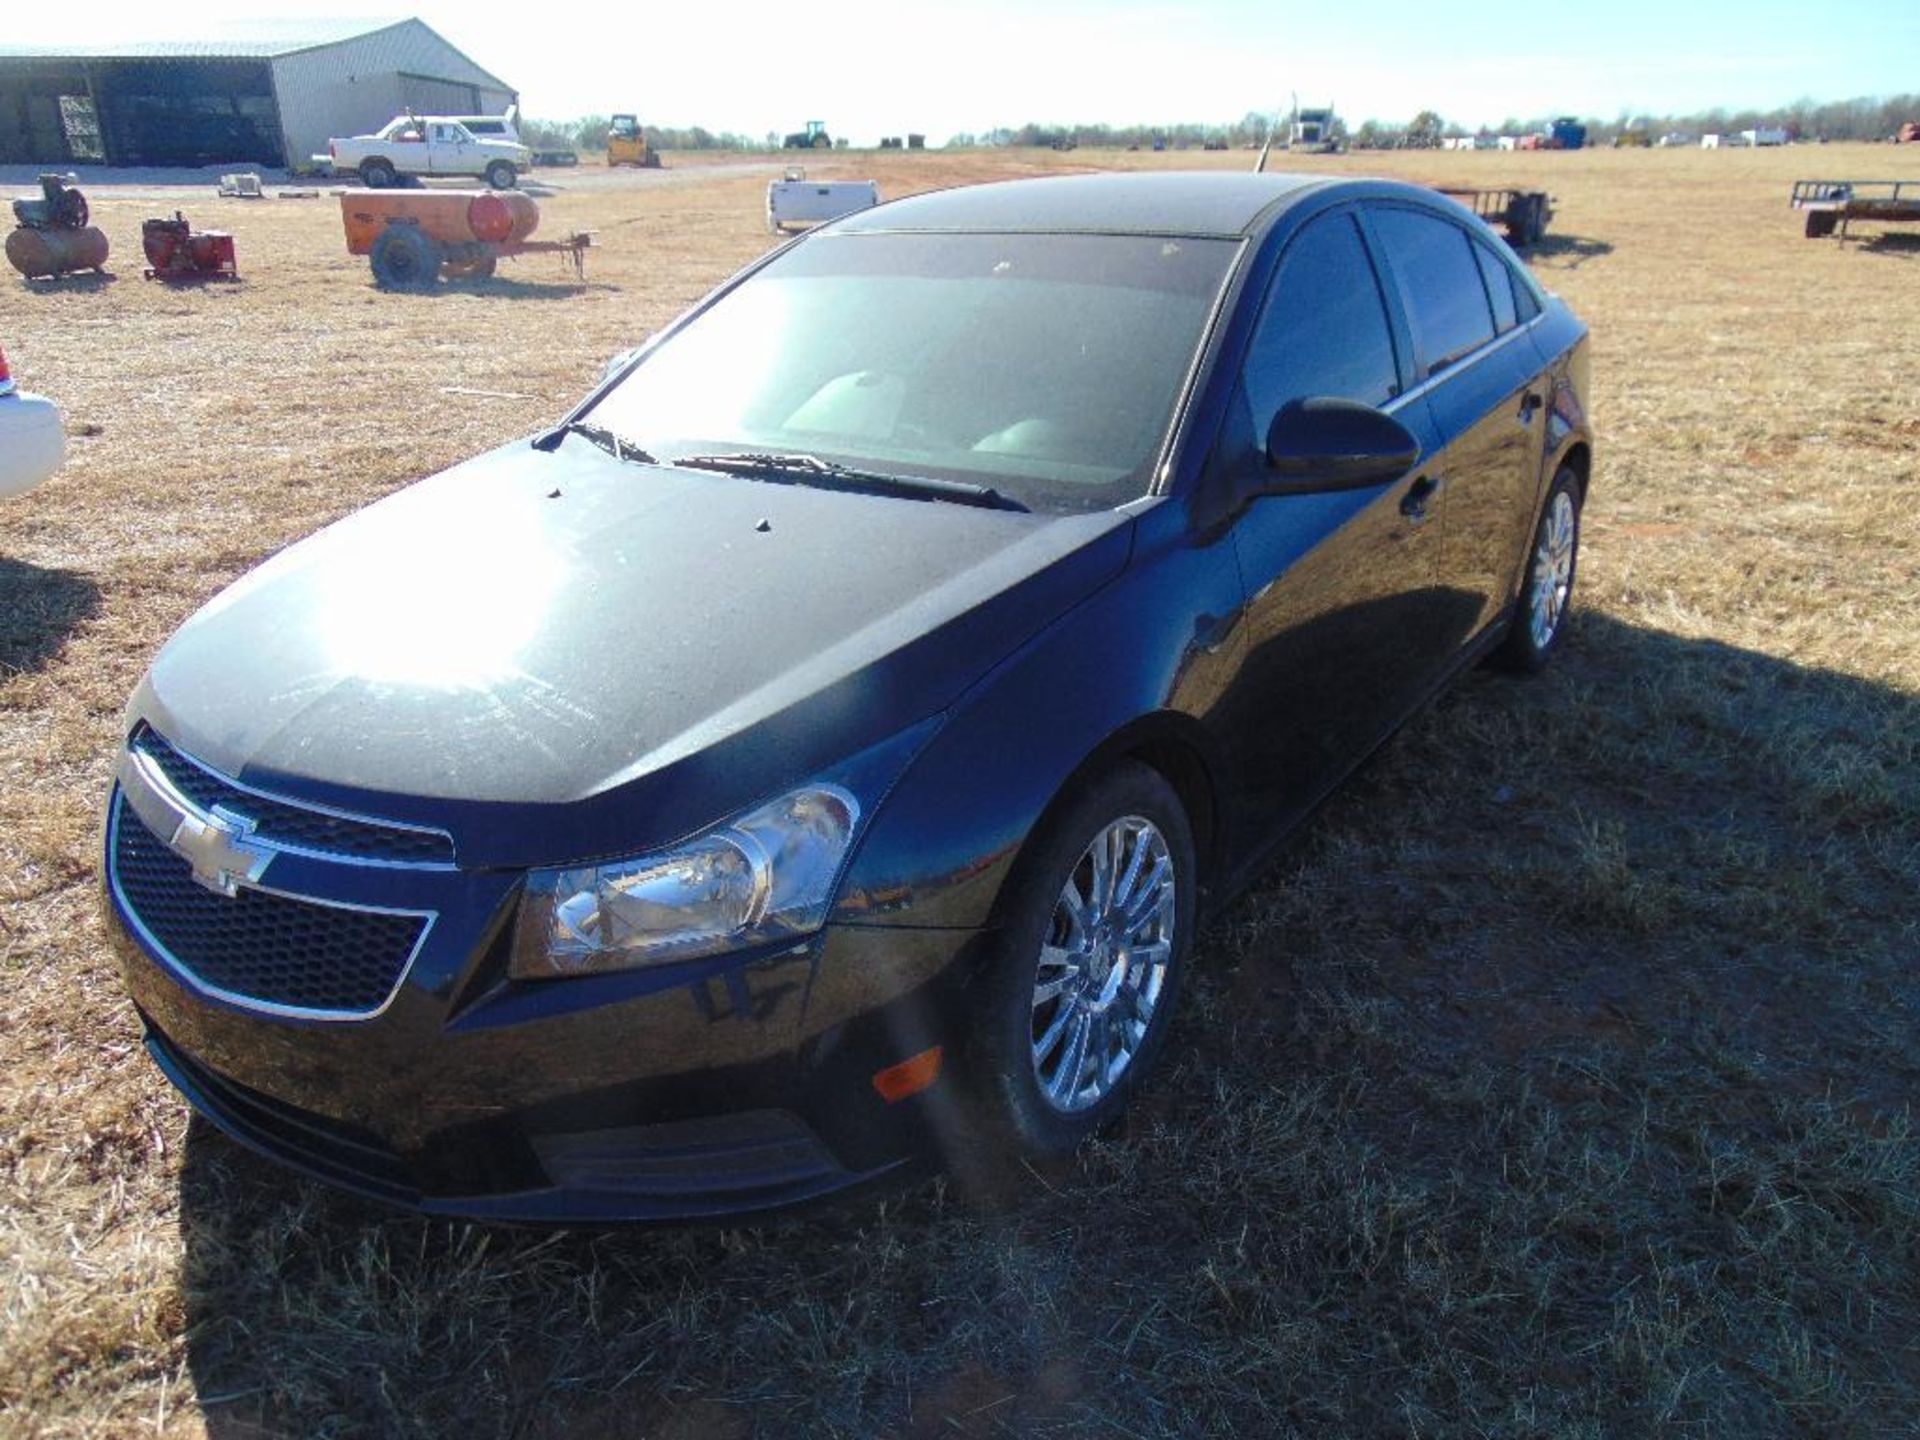 2011 Chevy Cruze s/n 1g1pj5s96b7290011, 4 cylinder, auto trans, od reads 97895 miles, - Image 5 of 10